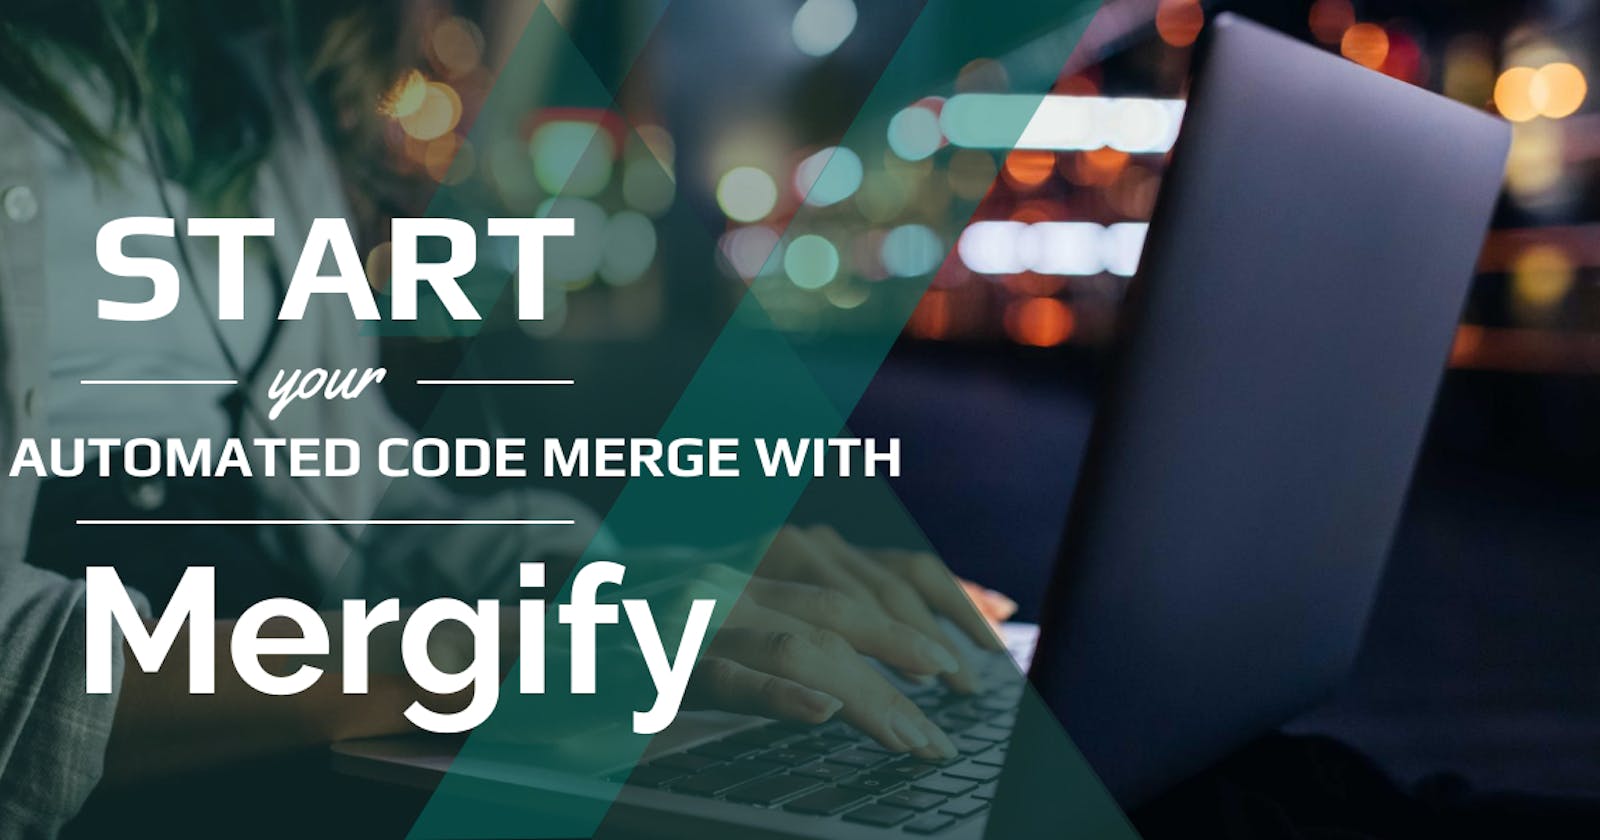 Complete guide about Mergify and the gain it represents.